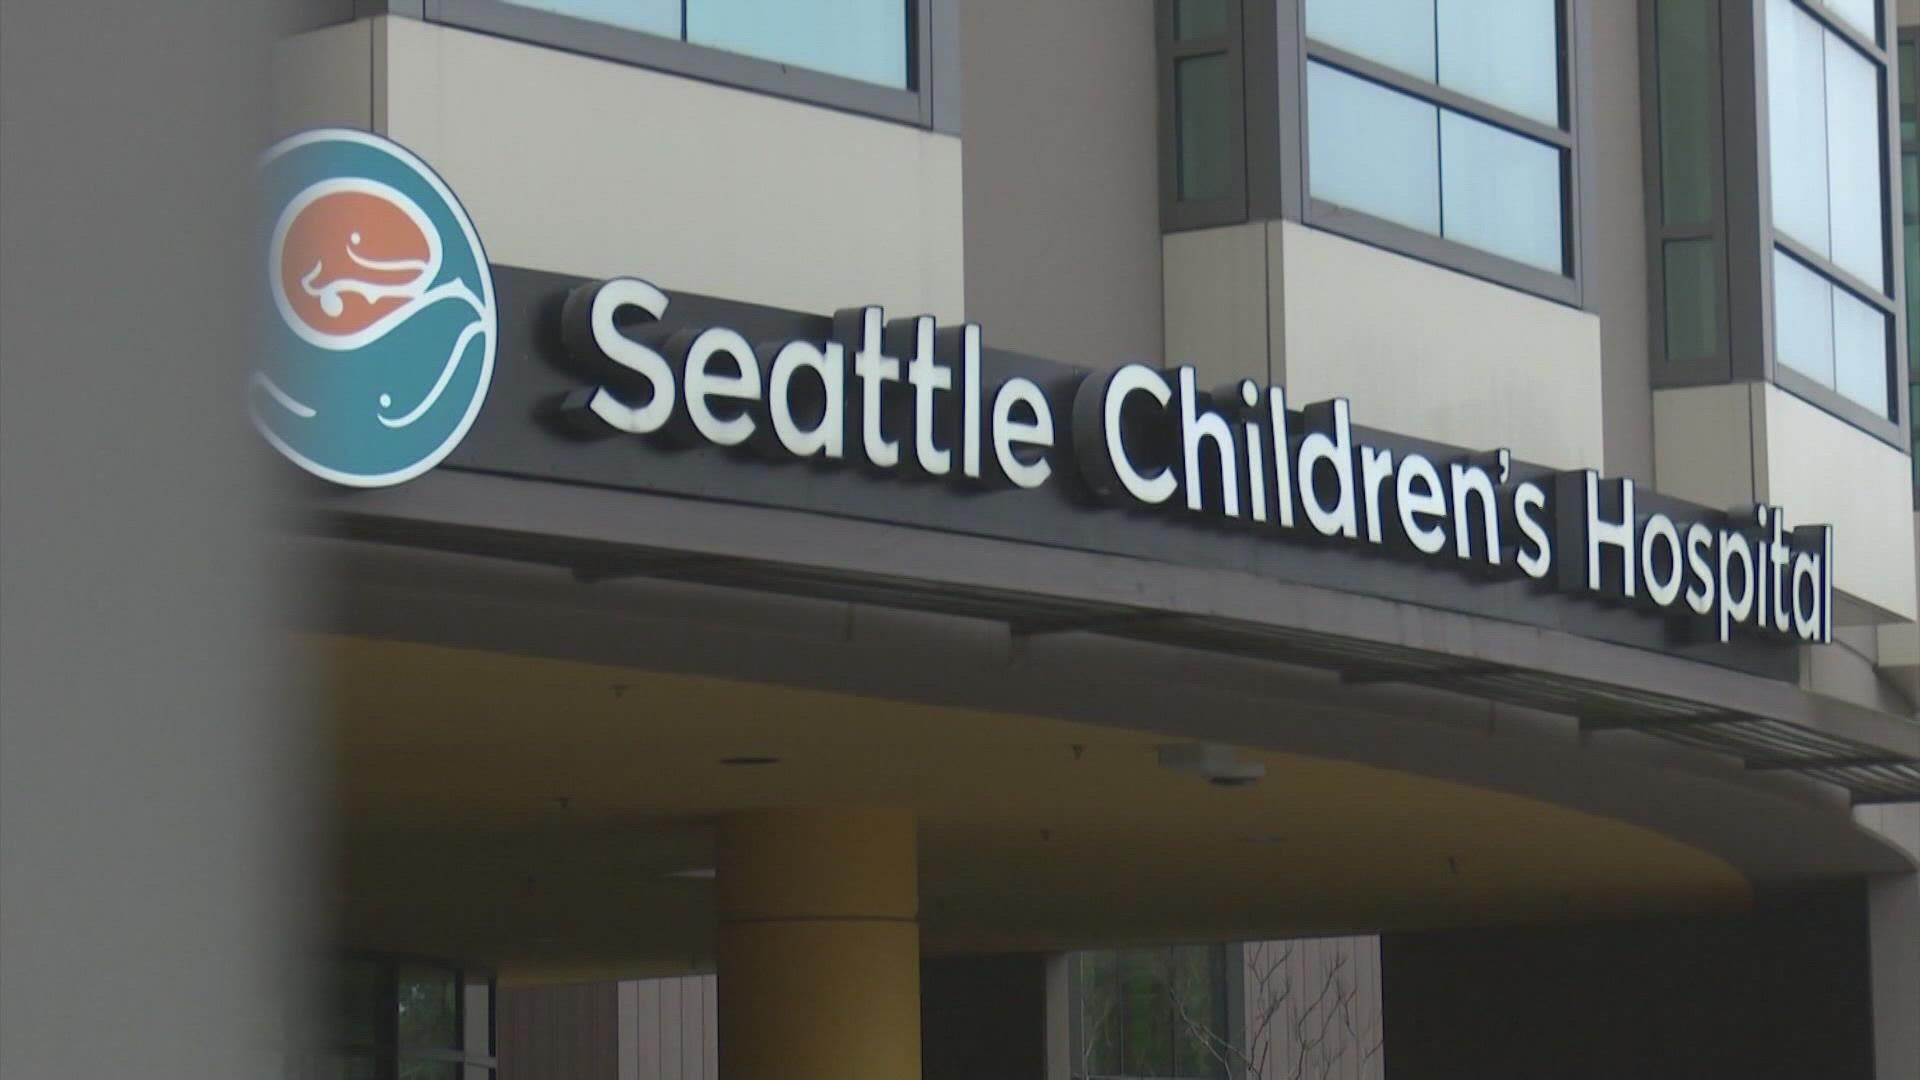 Seattle Children's will now offer telemedicine appointments seven days a week for children and teens across the state